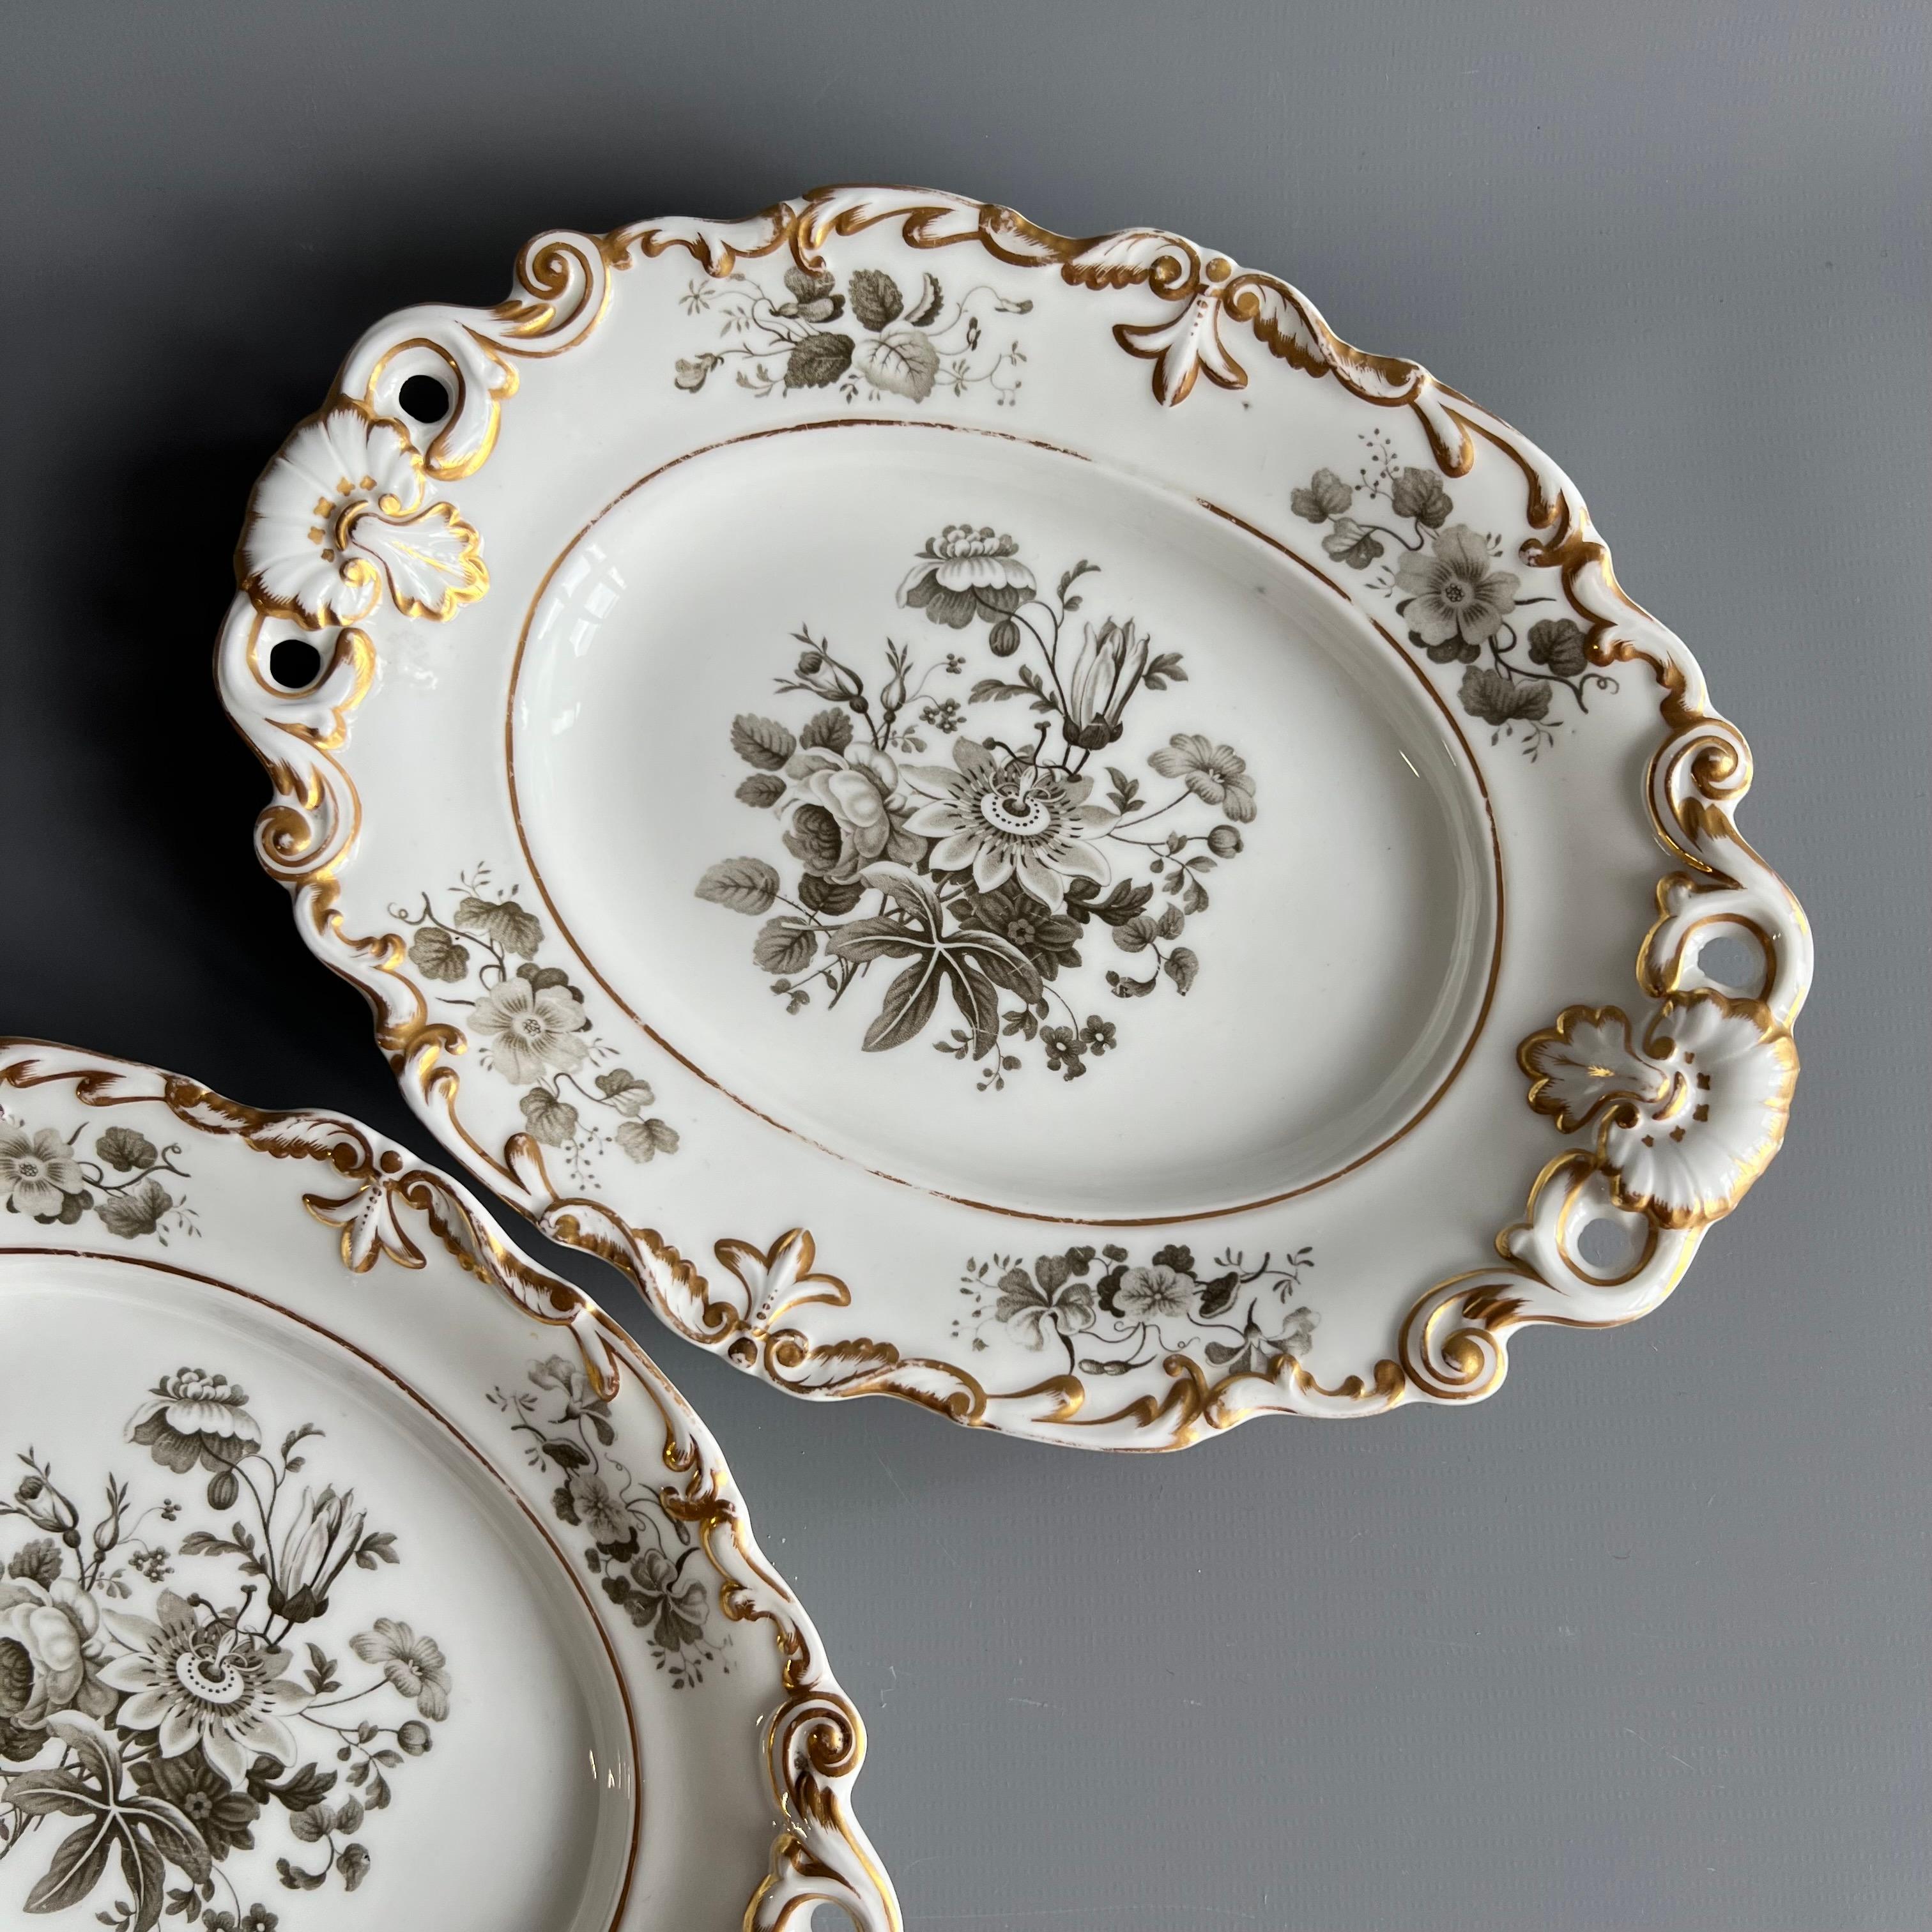 Minton Dessert Service, Inverted Shell White with Monochrome Flowers, ca 1830 For Sale 5